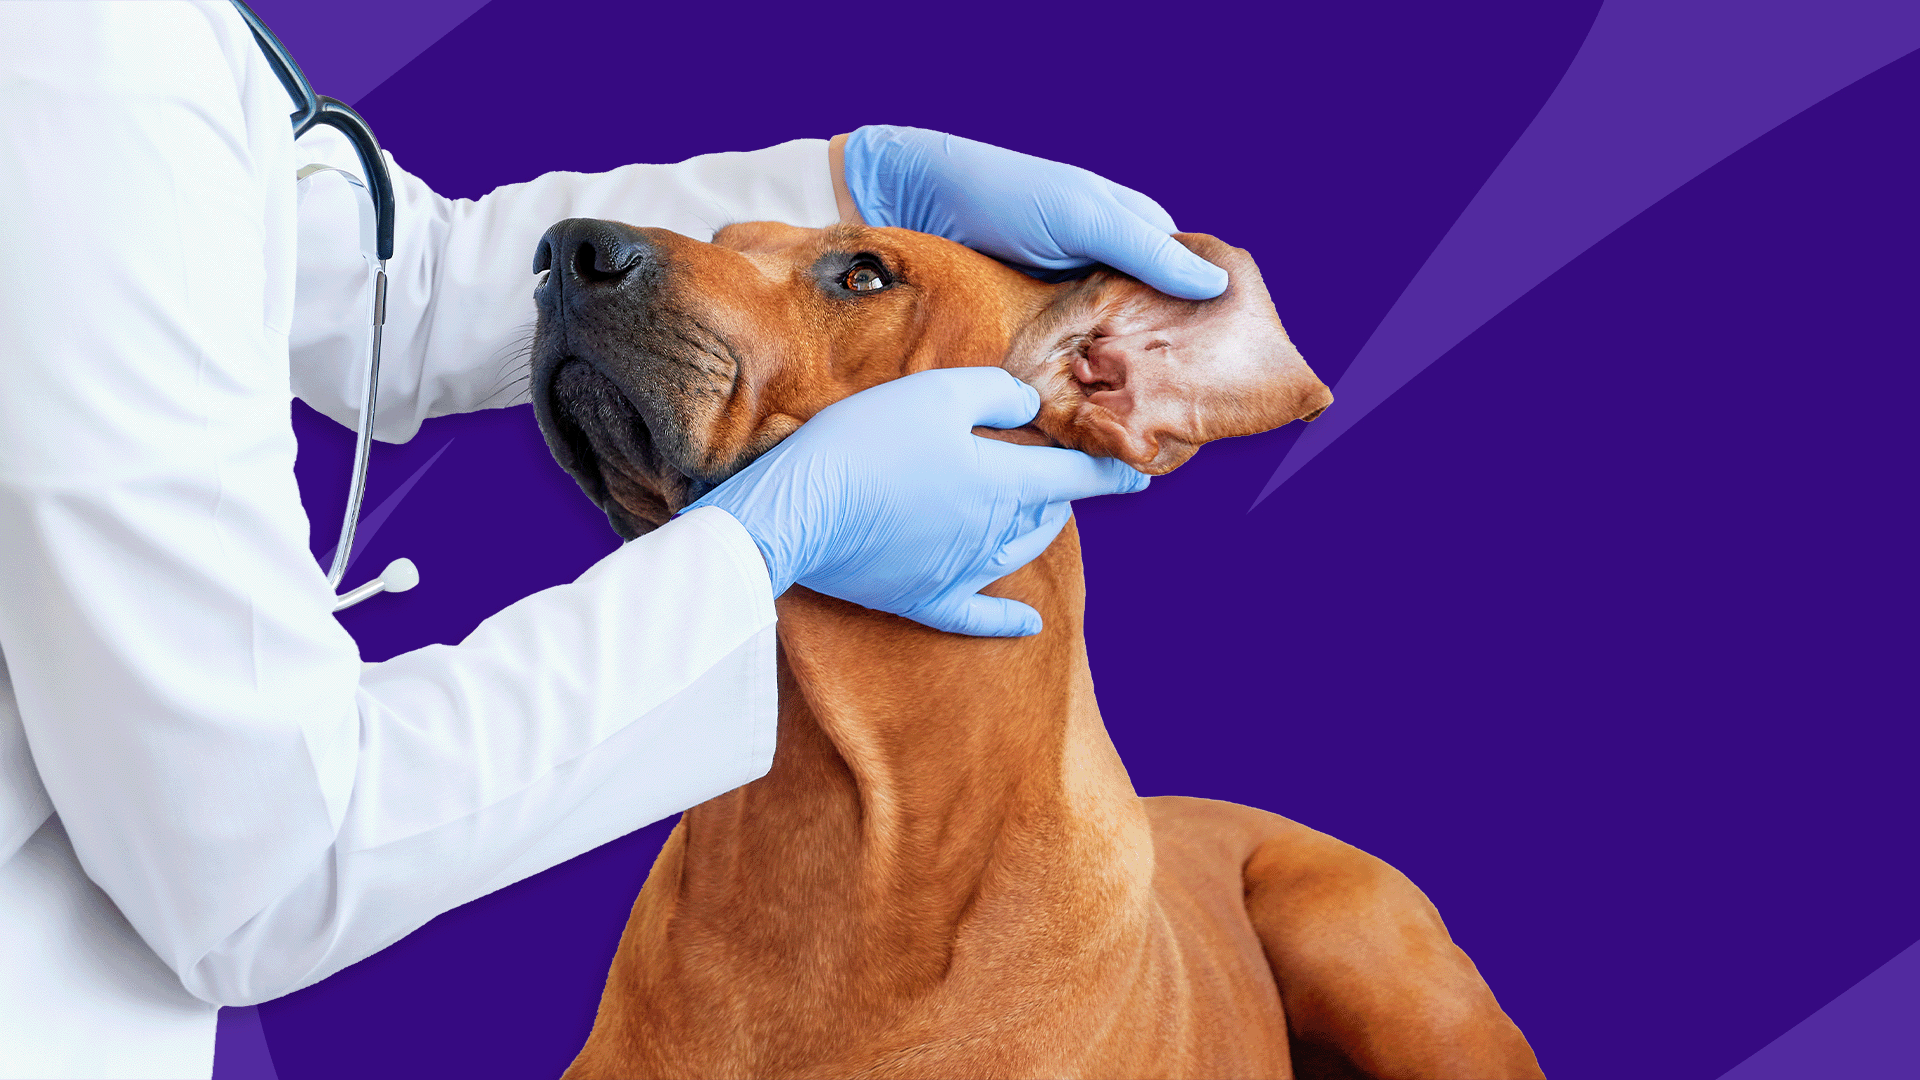 where do you inject penicillin in a dog